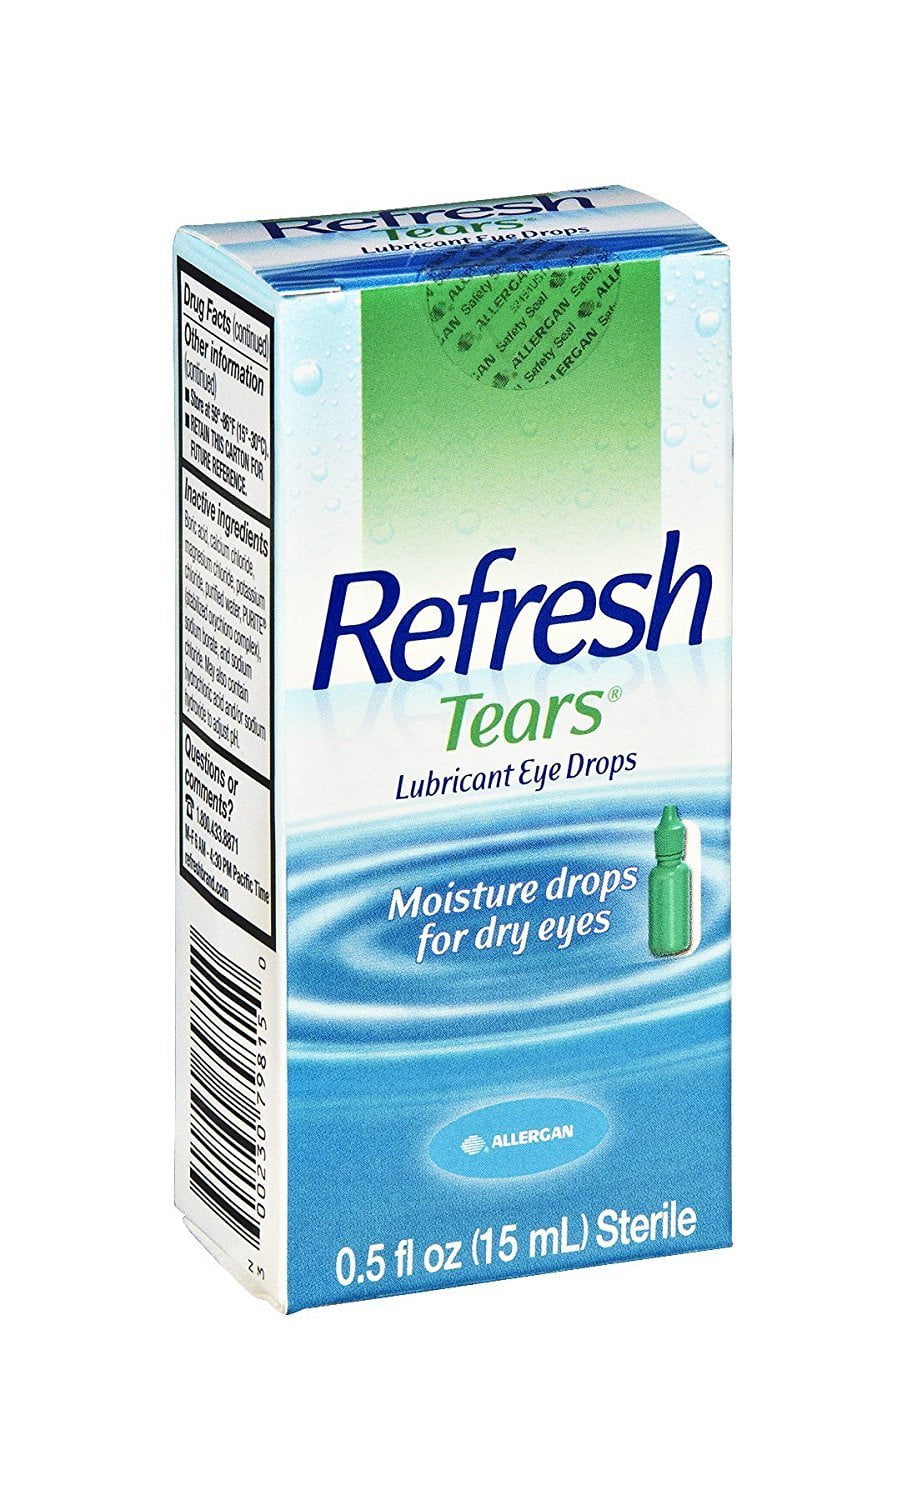 allergan-refresh-tears-eye-drops-for-mild-to-moderate-dry-eyes-pack